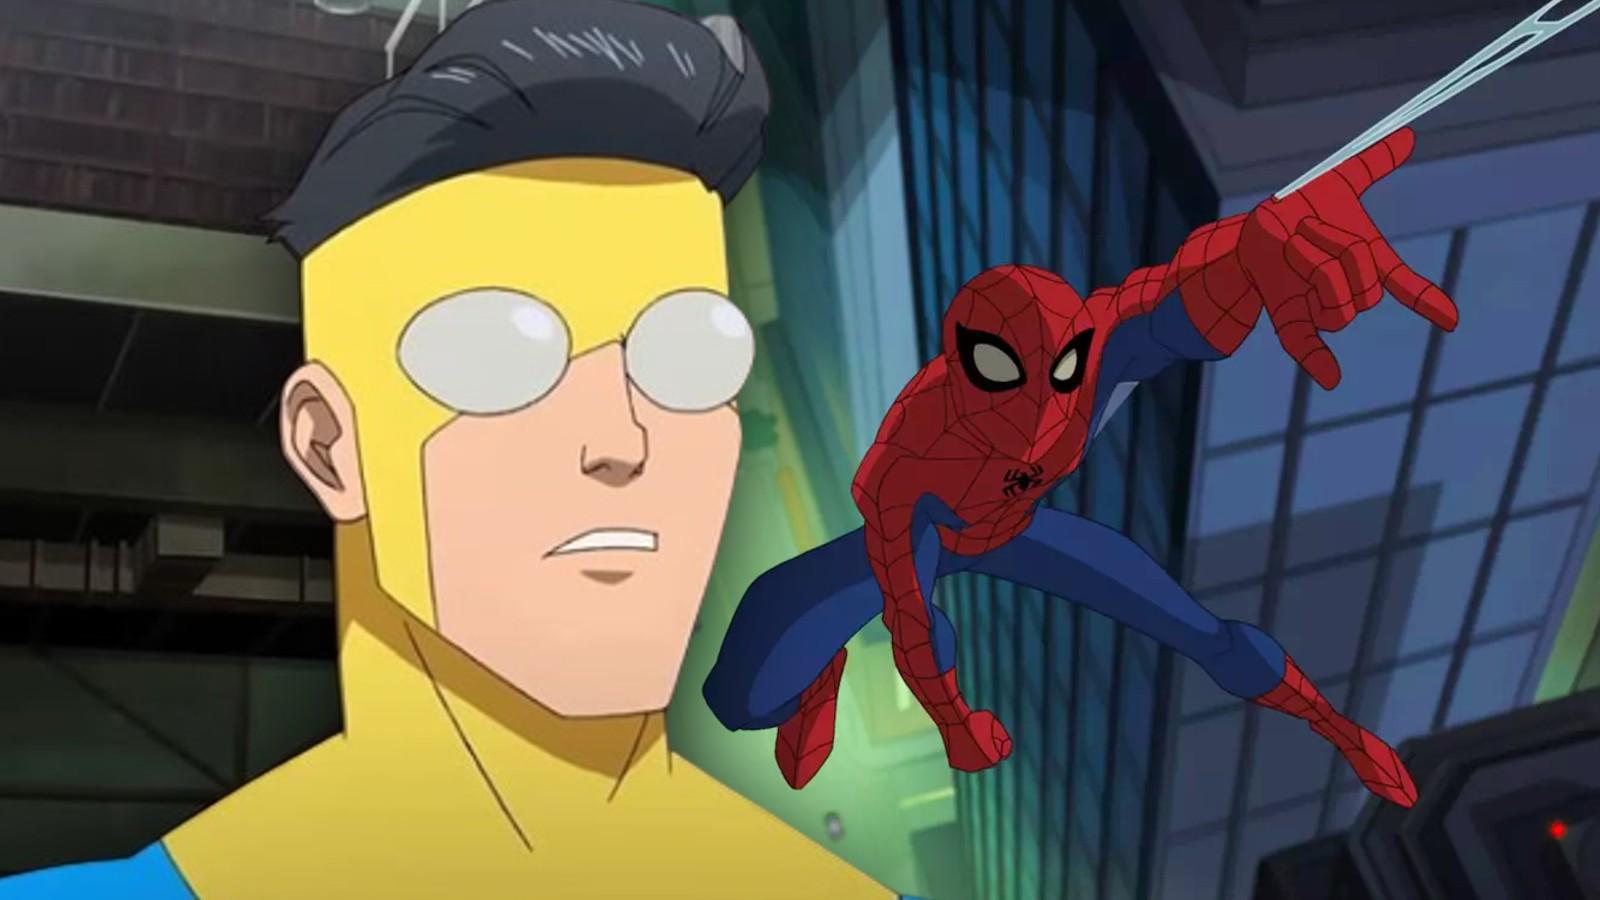 Invincible and the Spectacular Spider-Man